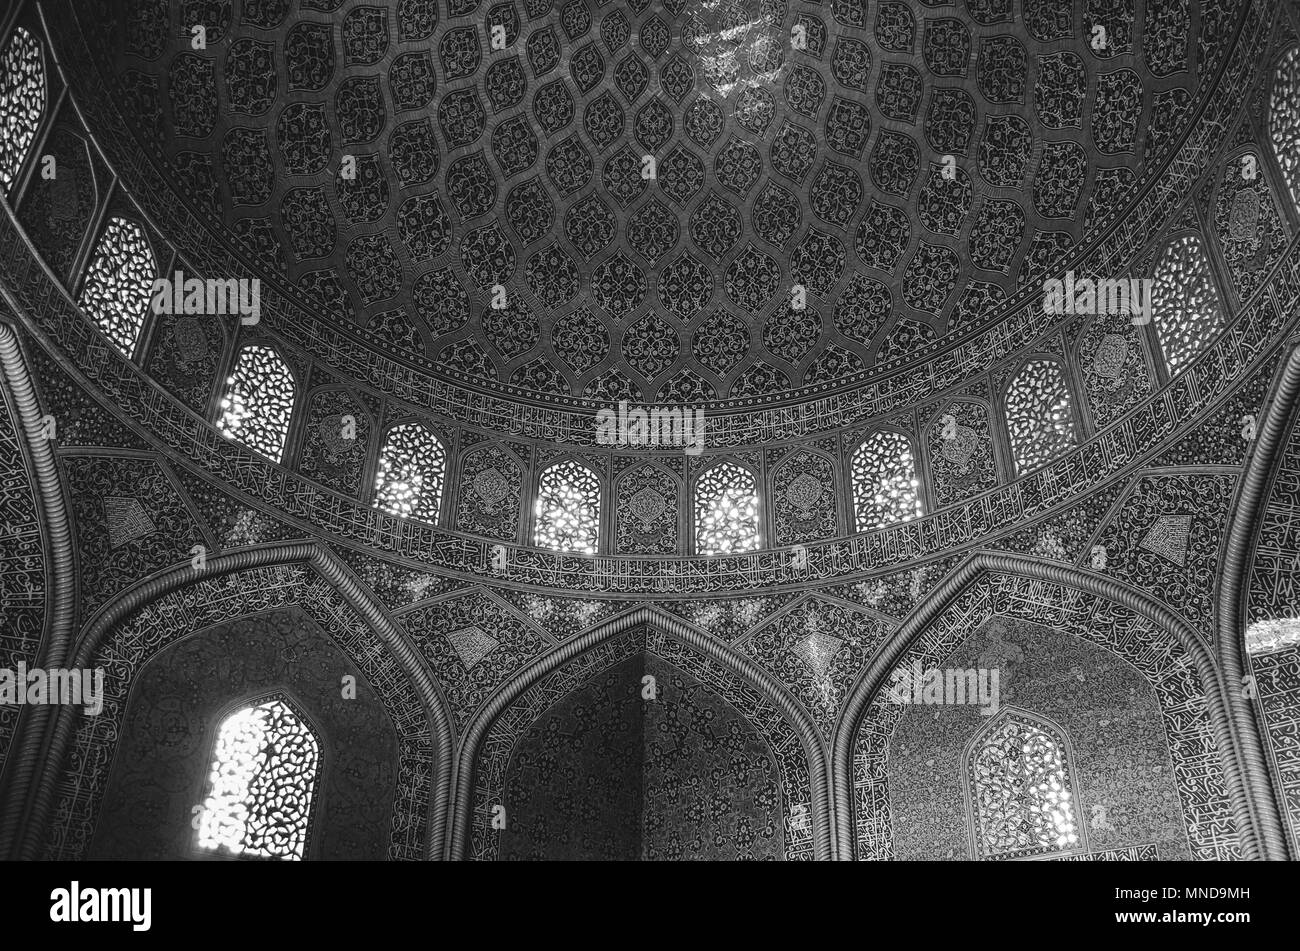 Interior view of lofty dome of the Shah Mosque in Sfahan, Iran covered with mosaic polychrome tiles, intended to give the spectator a sense of heavenly transcendence Stock Photo